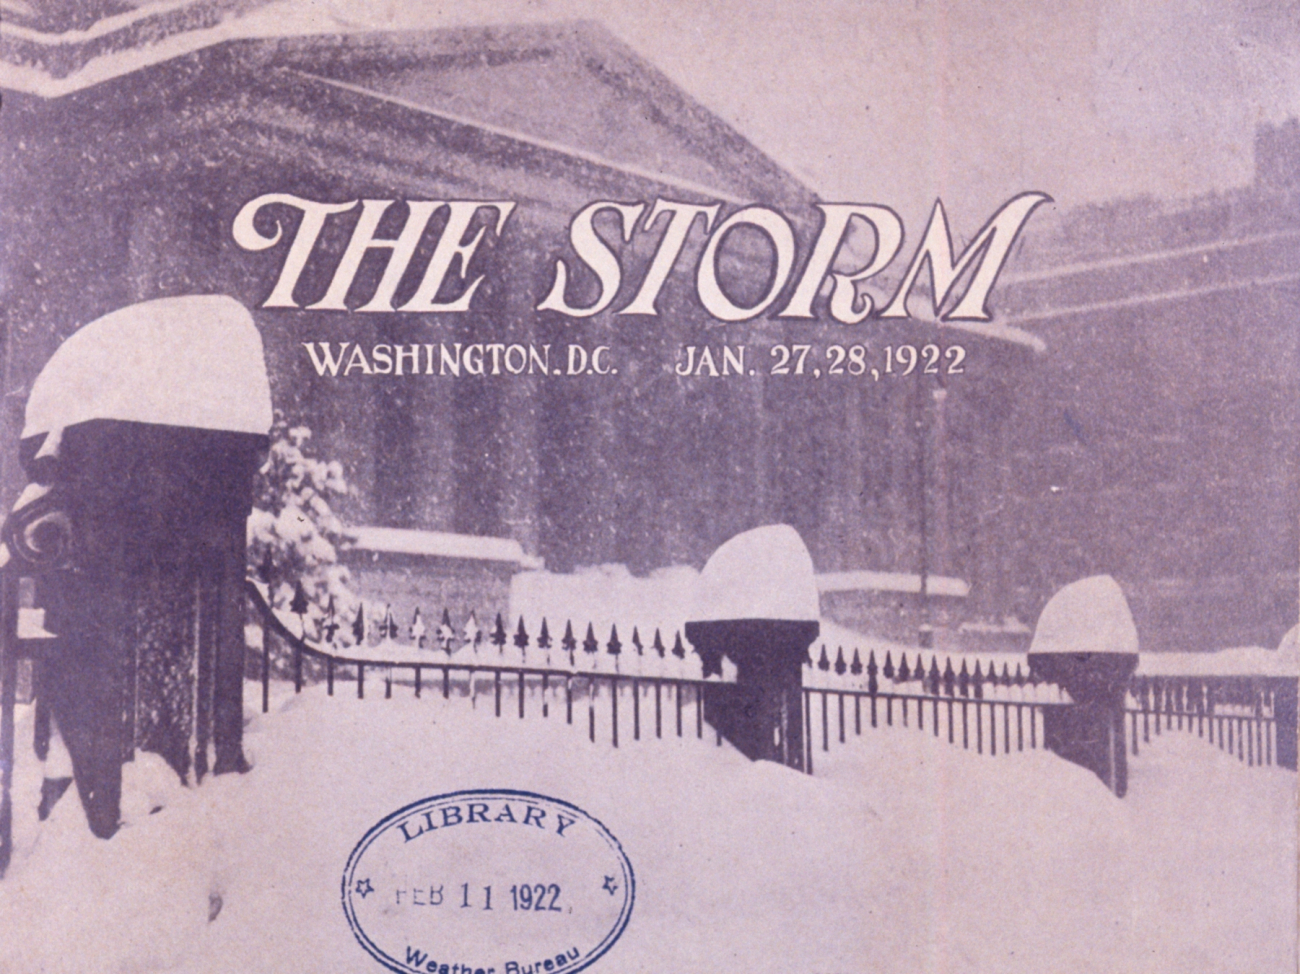 Cover page to photo essay on The Storm commemorating the Knickerbockerstorm